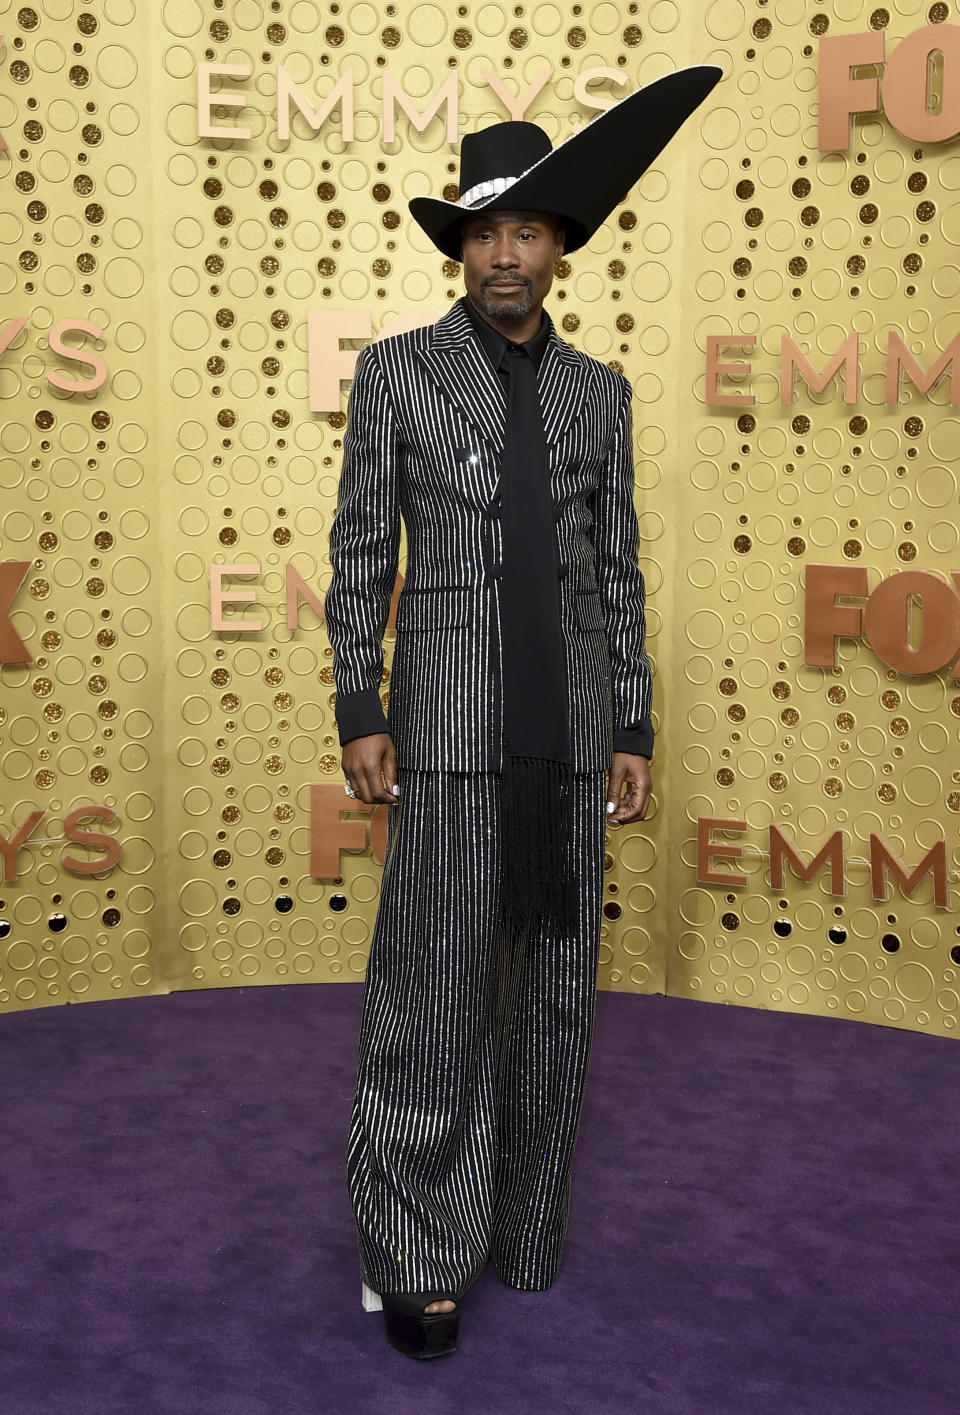 Billy Porter arrives at the 71st Primetime Emmy Awards on Sunday, Sept. 22, 2019, at the Microsoft Theater in Los Angeles. (Photo by Jordan Strauss/Invision/AP)